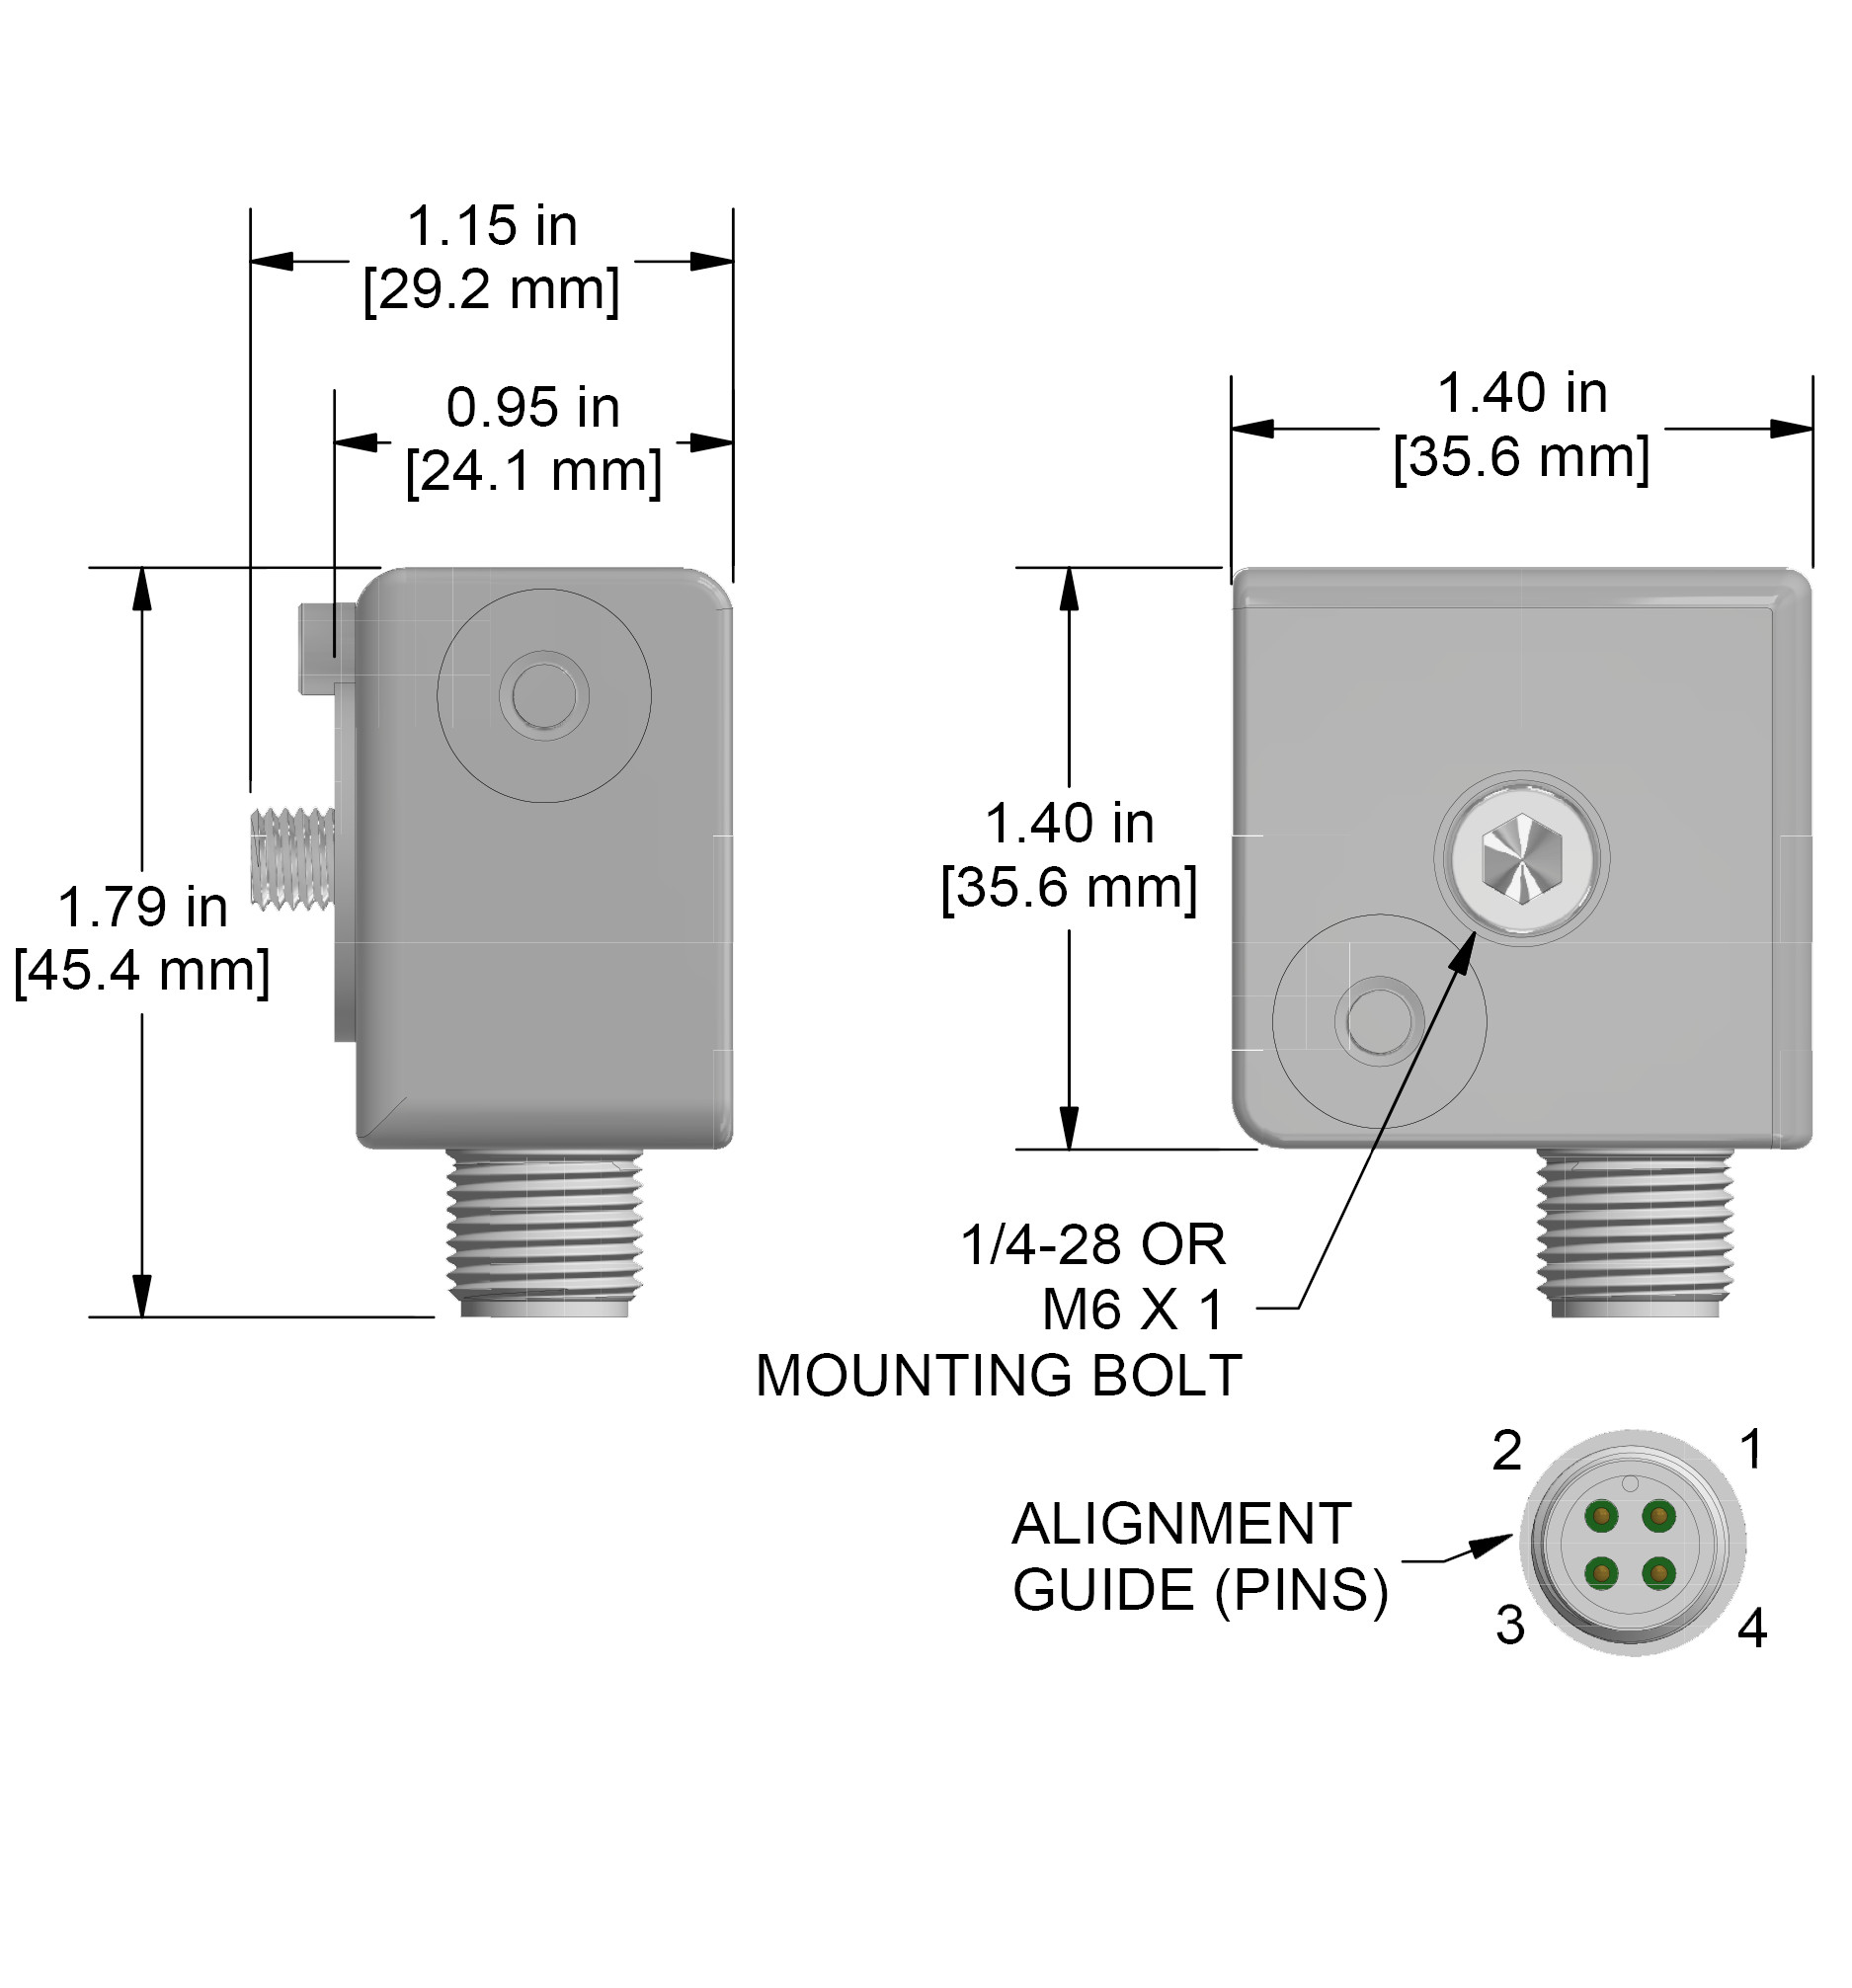 A drawing showing the dimensions and pin configuration of a CTC AC115-M12D industrial accelerometer.